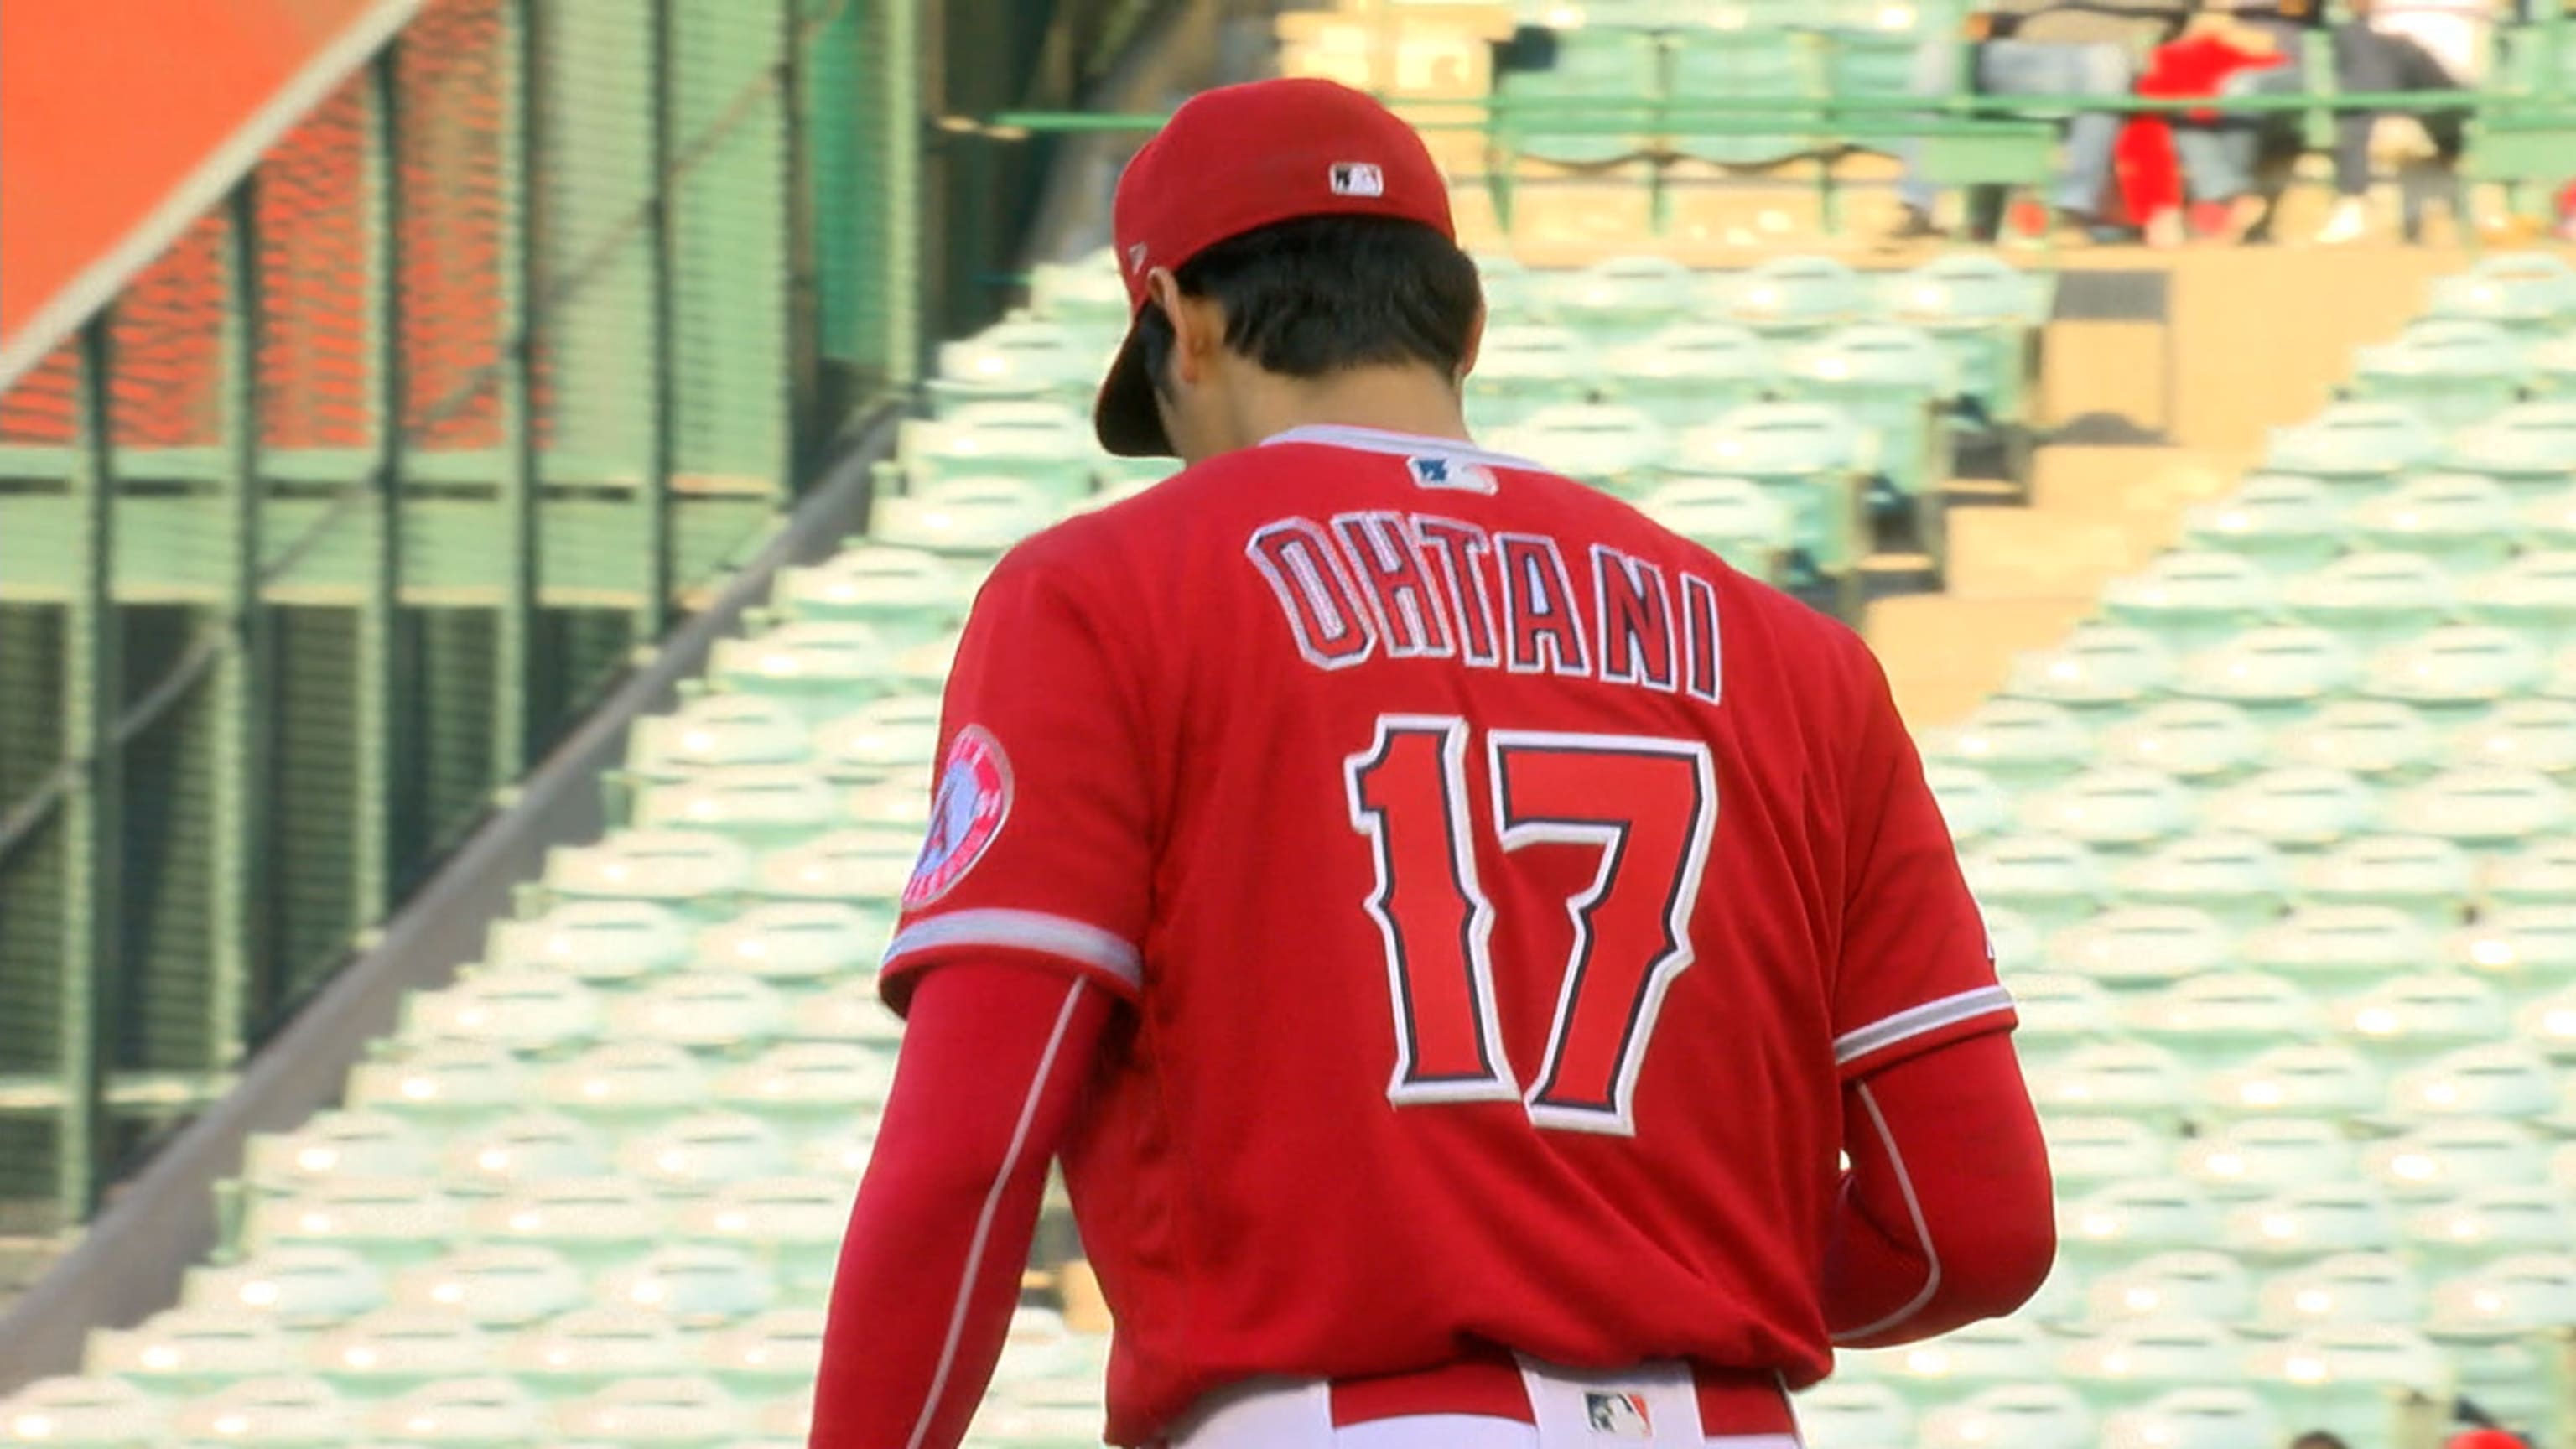 2021 Shohei Ohtani Game Used White Jersey - Pitching Win and Home Run  Jersey From His First MVP Season (6/9, 6/17, & 9/4/21)